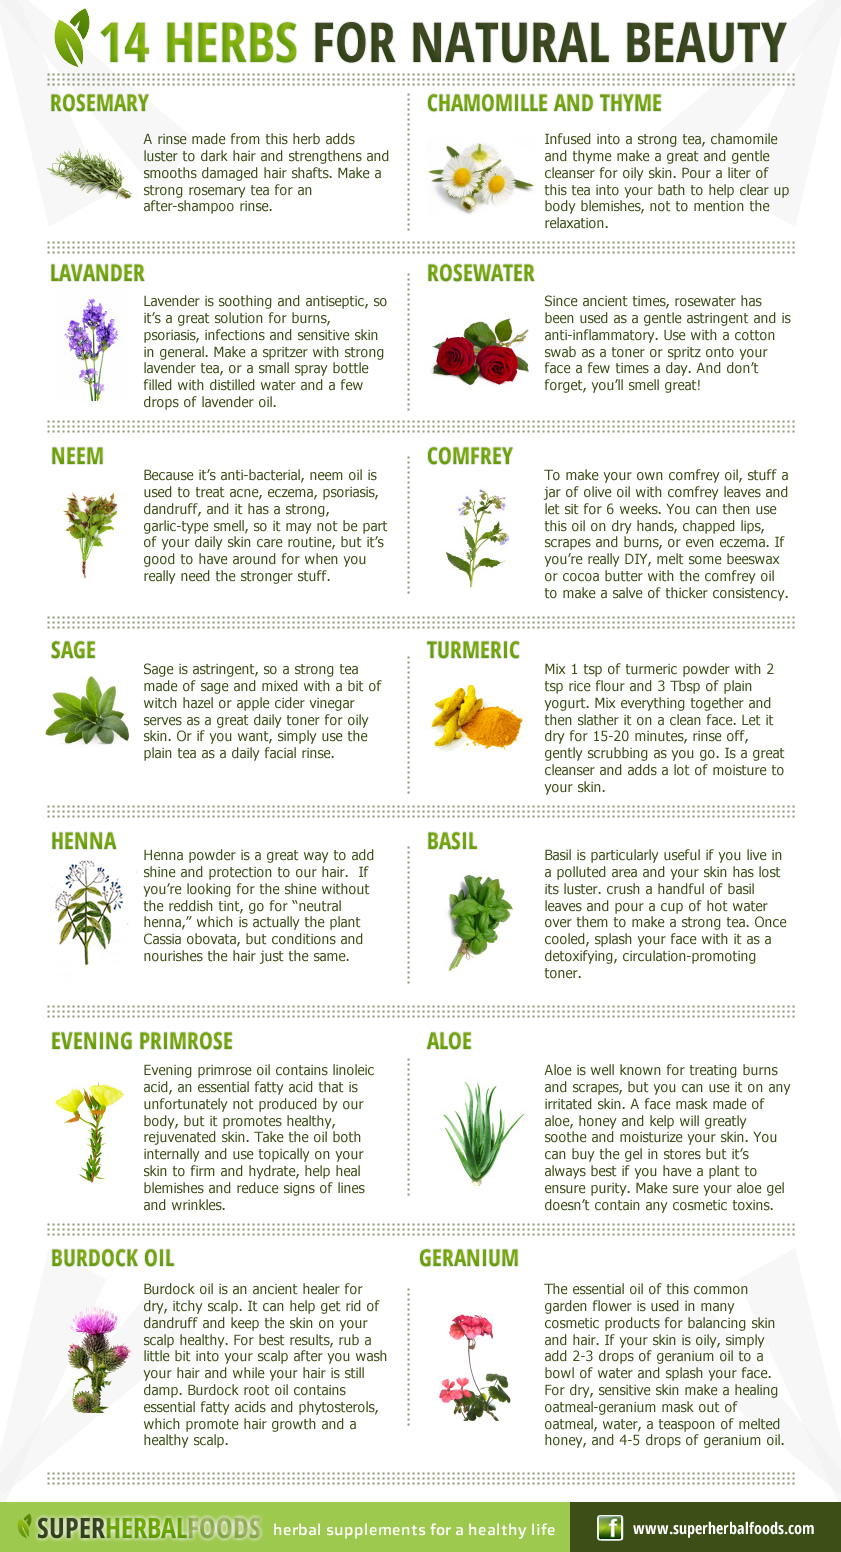 Top 14 Herbs For Natural Health And Beauty Infographic